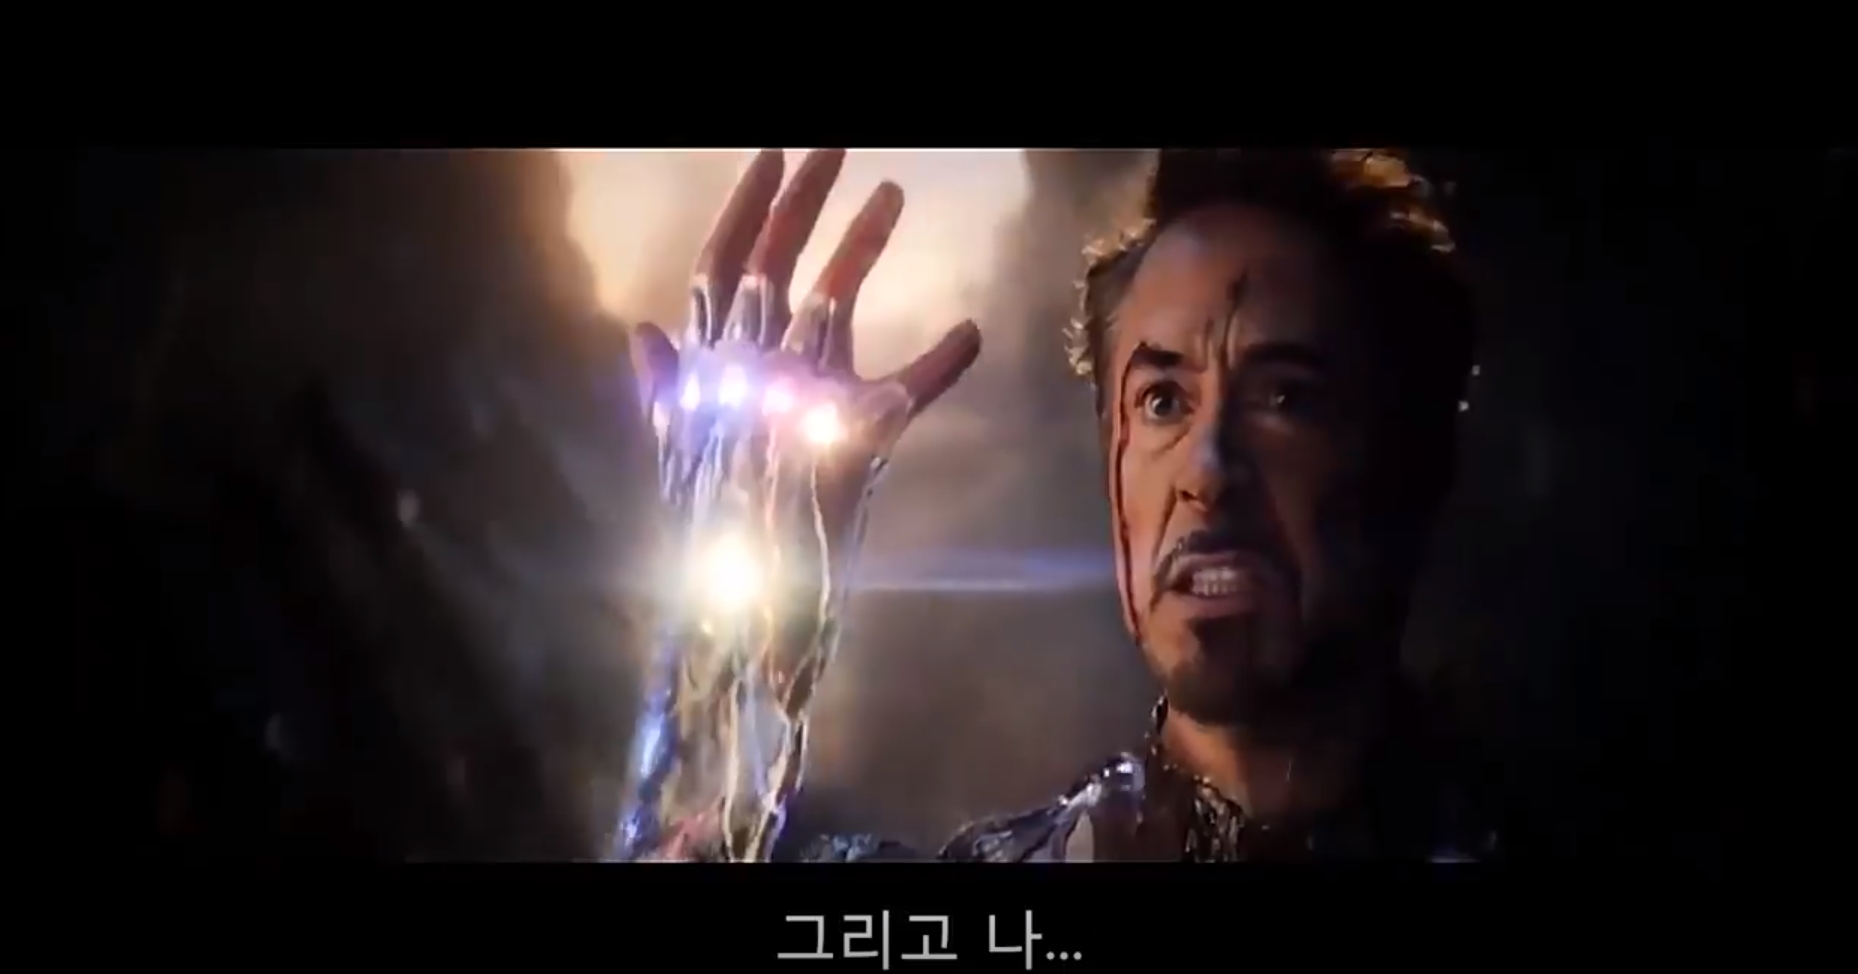 AI's real-time translation of the single Avengers Endgame with Google's automatic translation